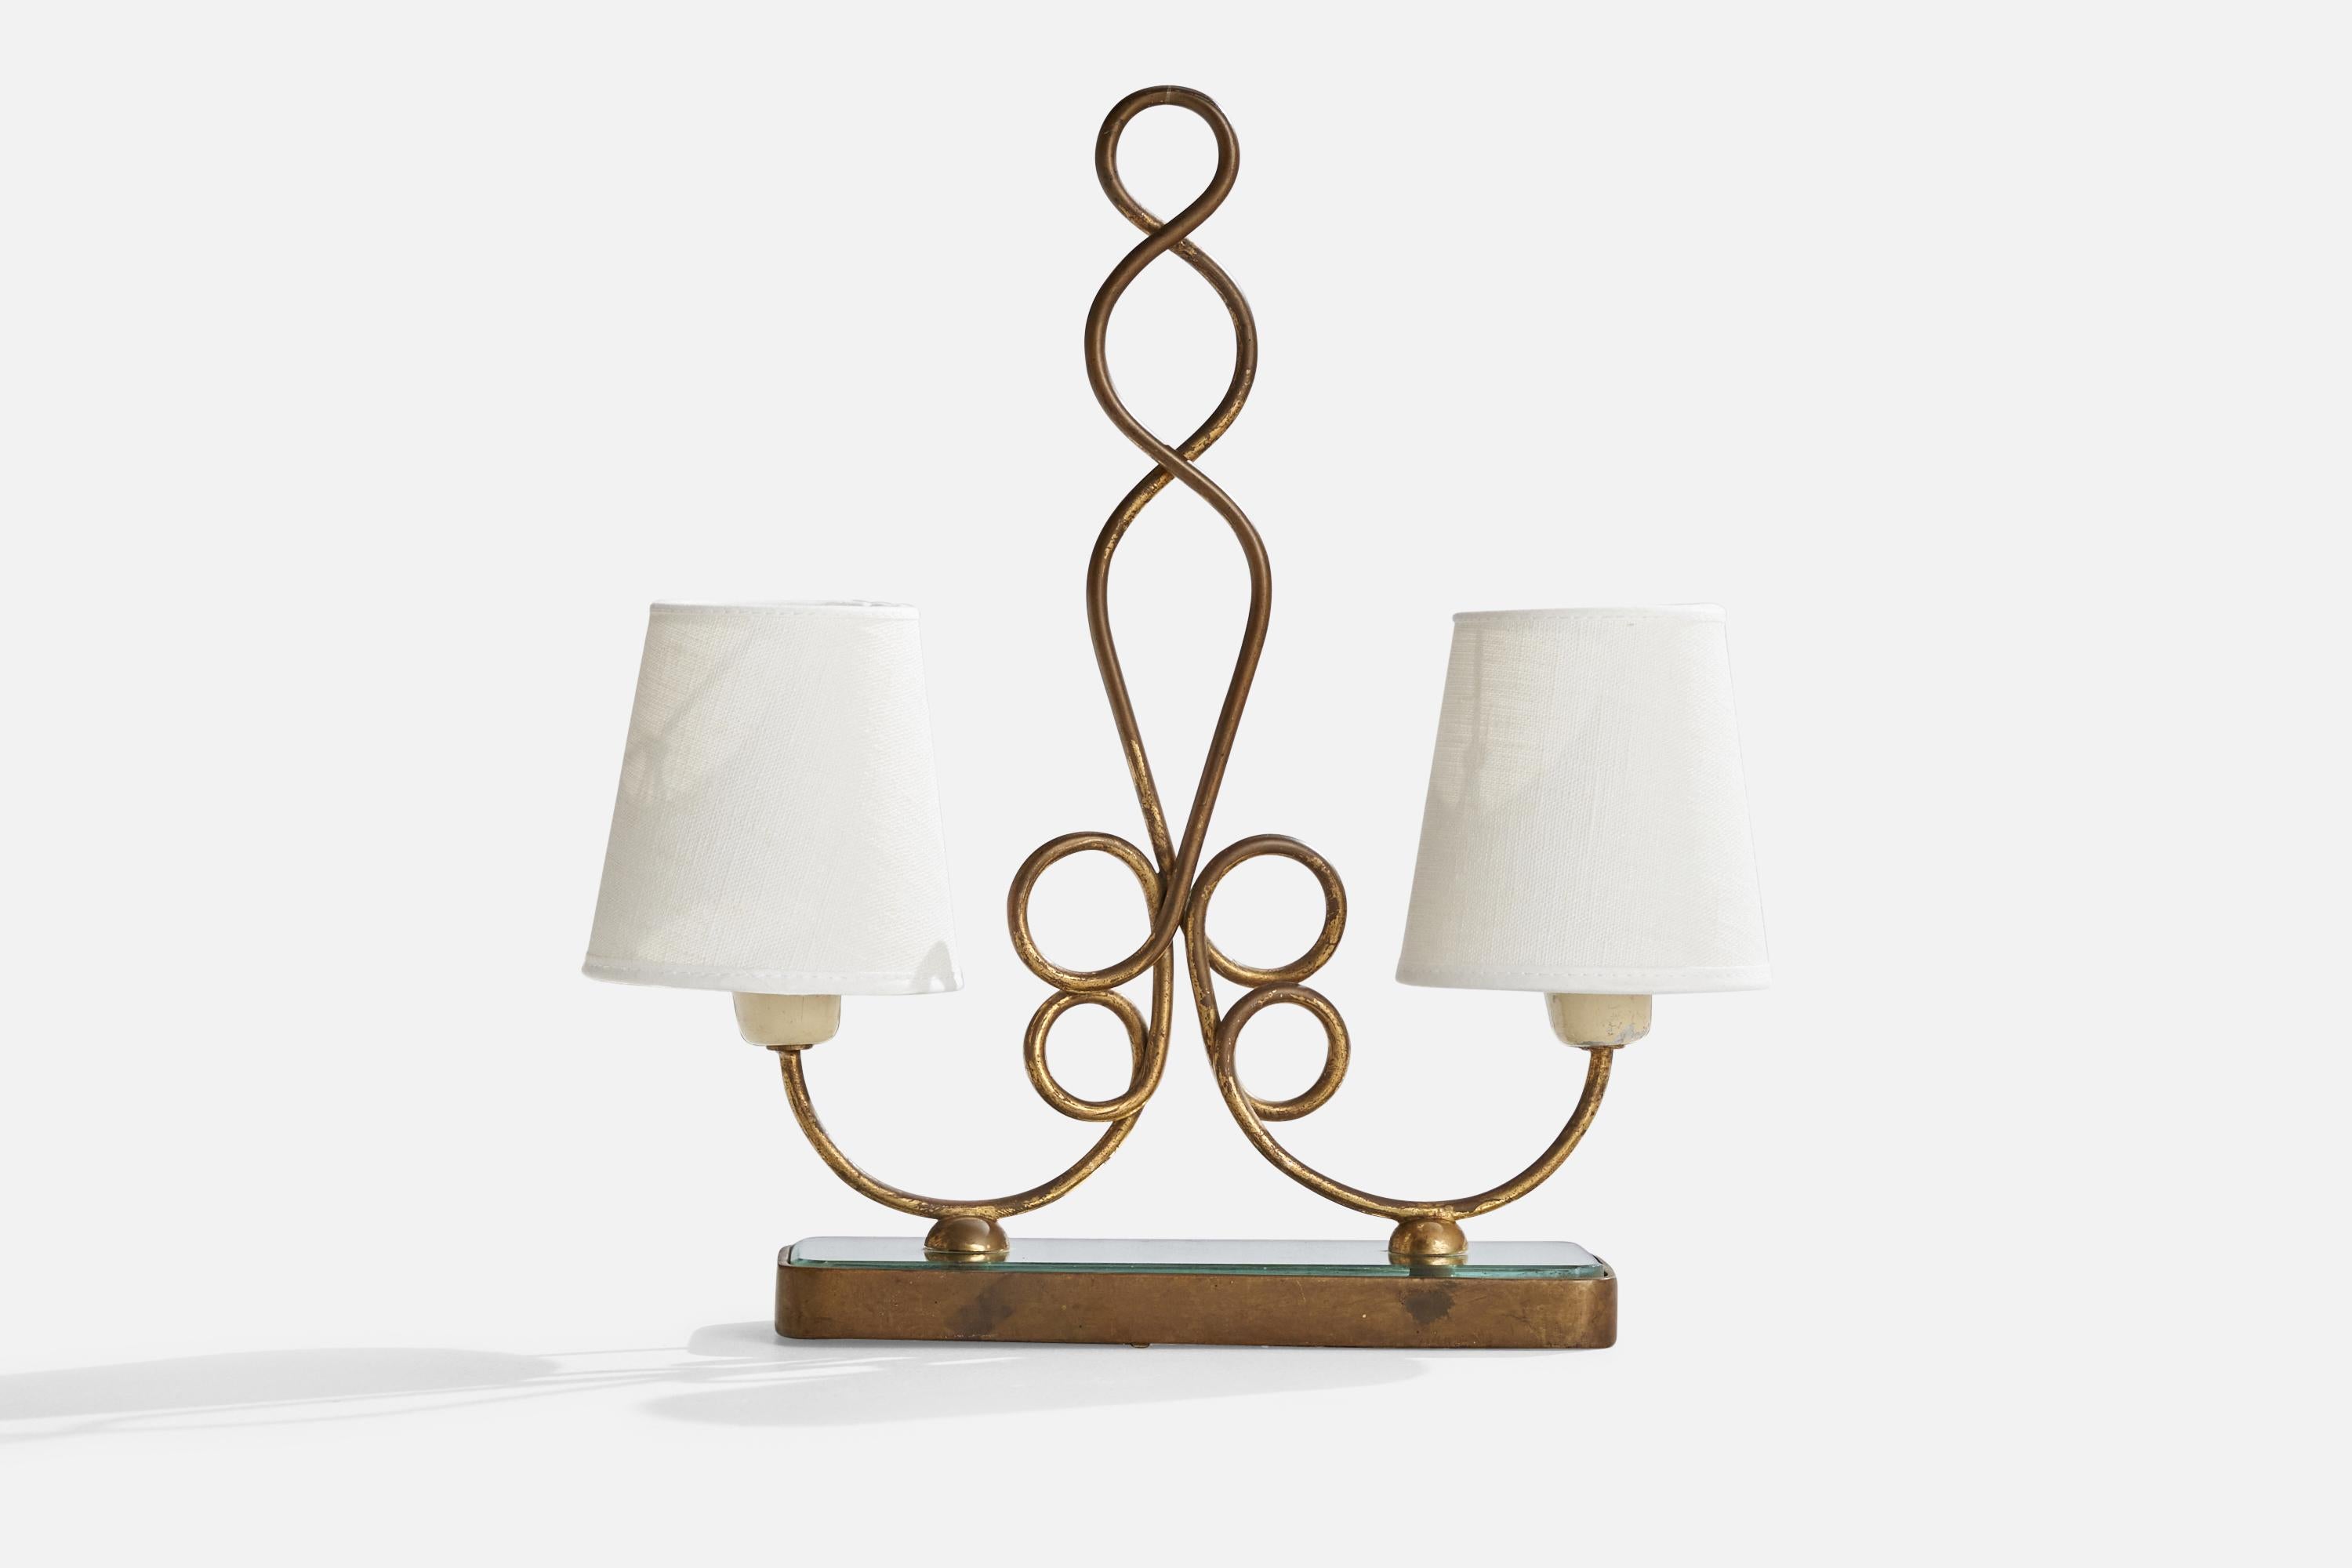 A brass, glass, white lacquered metal and white fabric table lamp designed and produced in Italy, c. 1940s.

Overall Dimensions (inches): 13.5” H x 12.5.5” W x 4.31” D
Stated dimensions include shade.
Bulb Specifications: E-12 Bulb
Number of